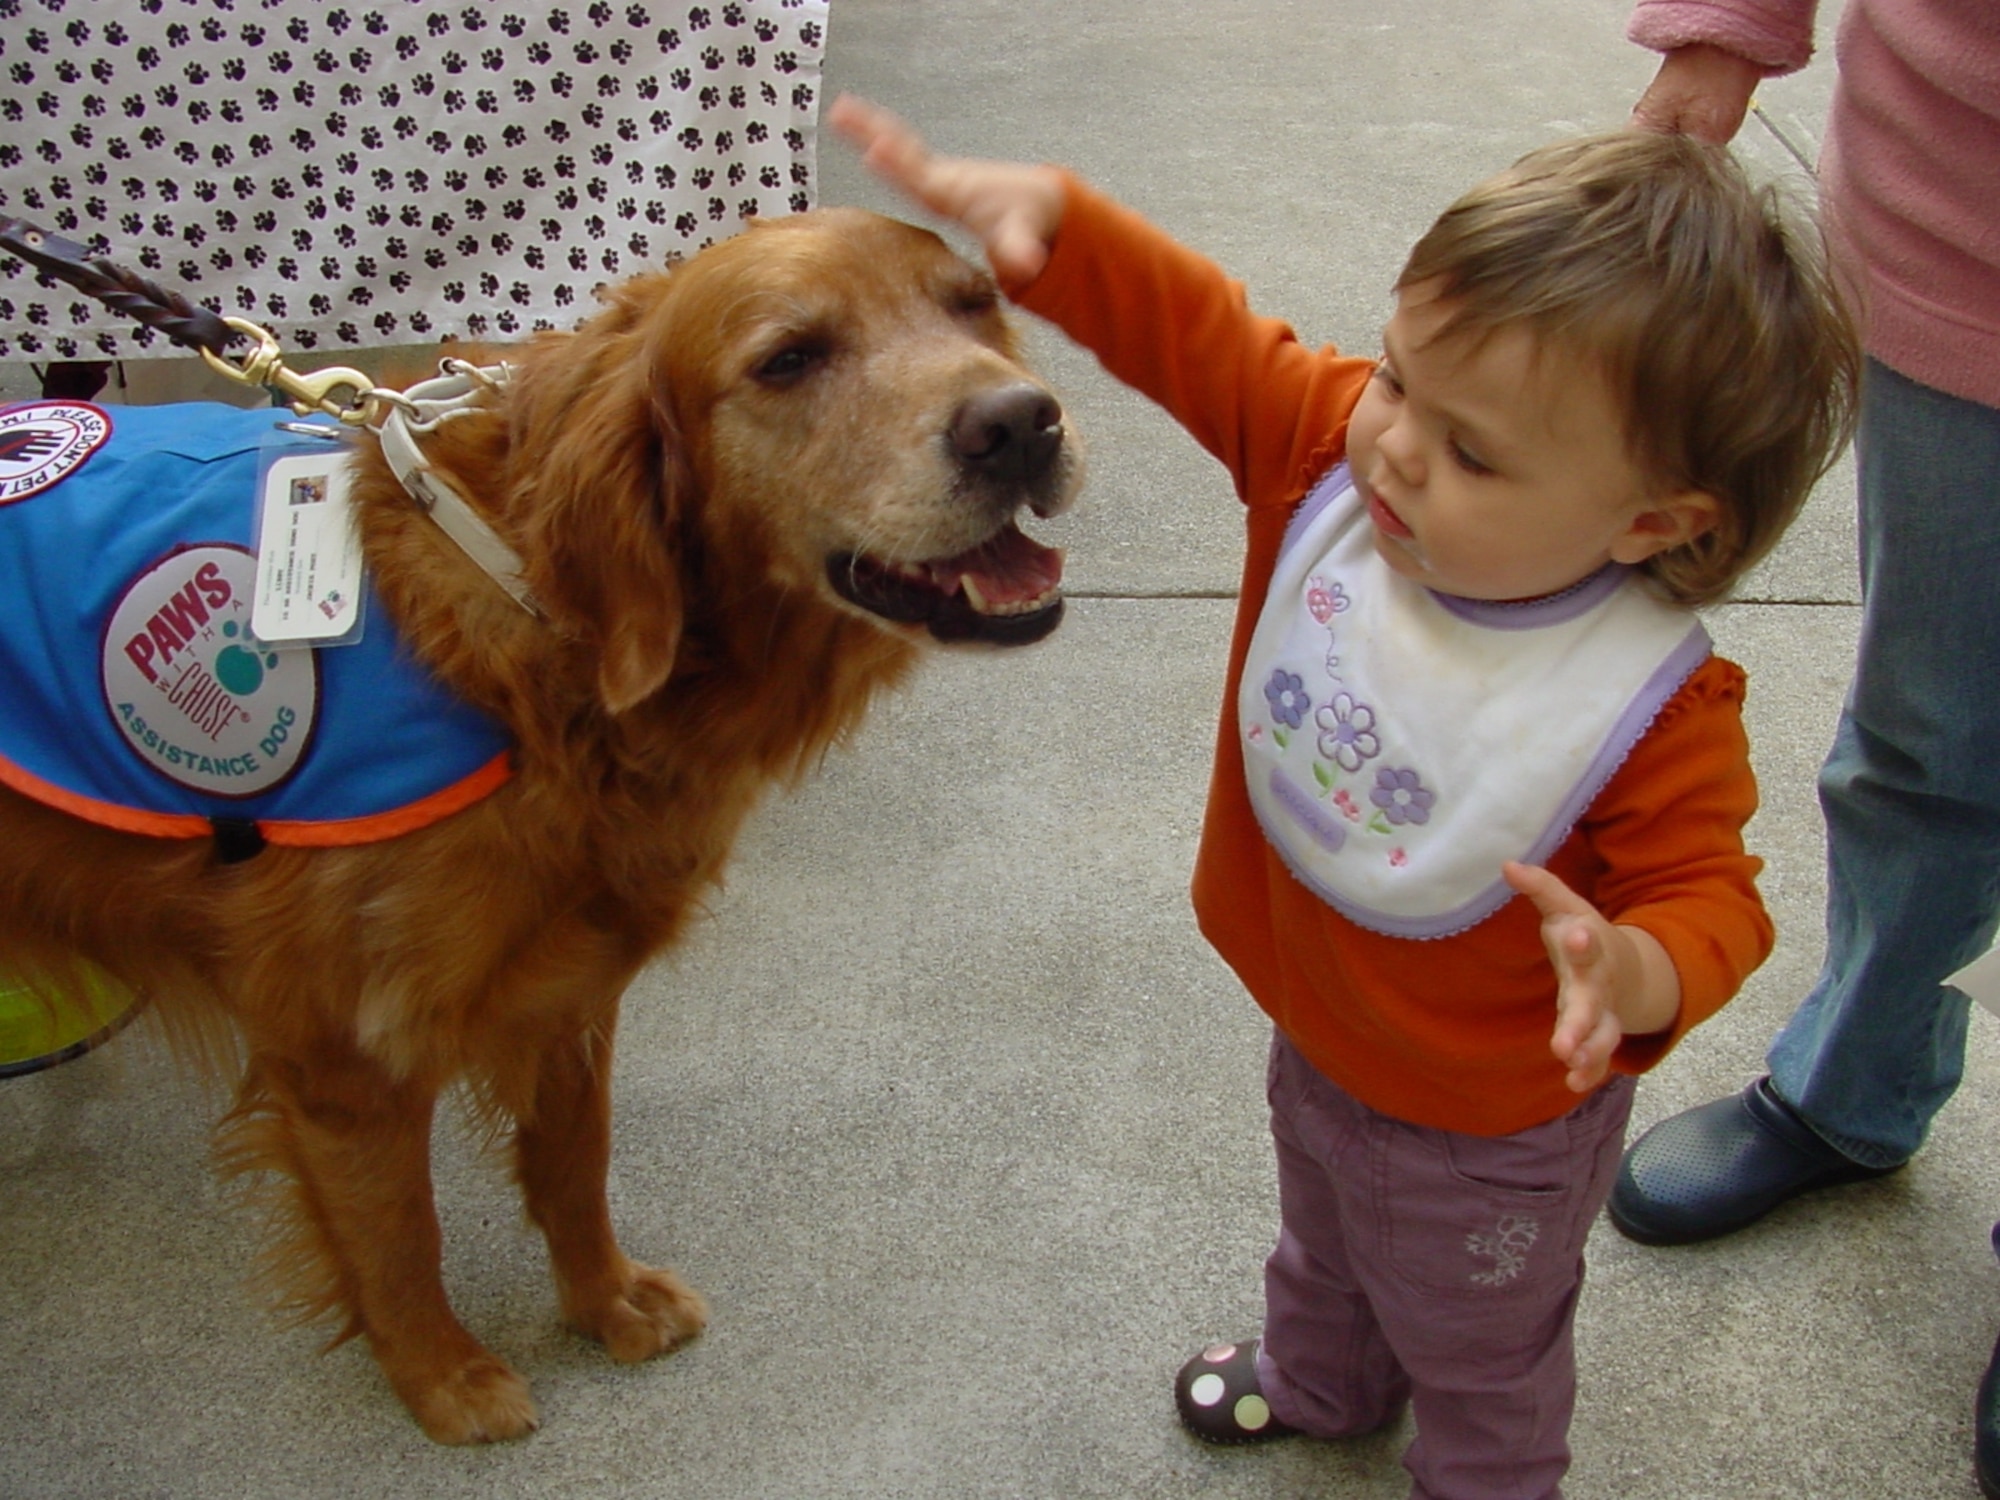 Natalia Olds, 14 months, granddaughter of Gregory and Anita Olds, makes friends with a four-legged member of the “Paws with a Cause” program during a kick-off event for the Combined Federal Campaign at the David Grant USAF Medical Center. (U.S. Air Force photo/Jim Spellman) 